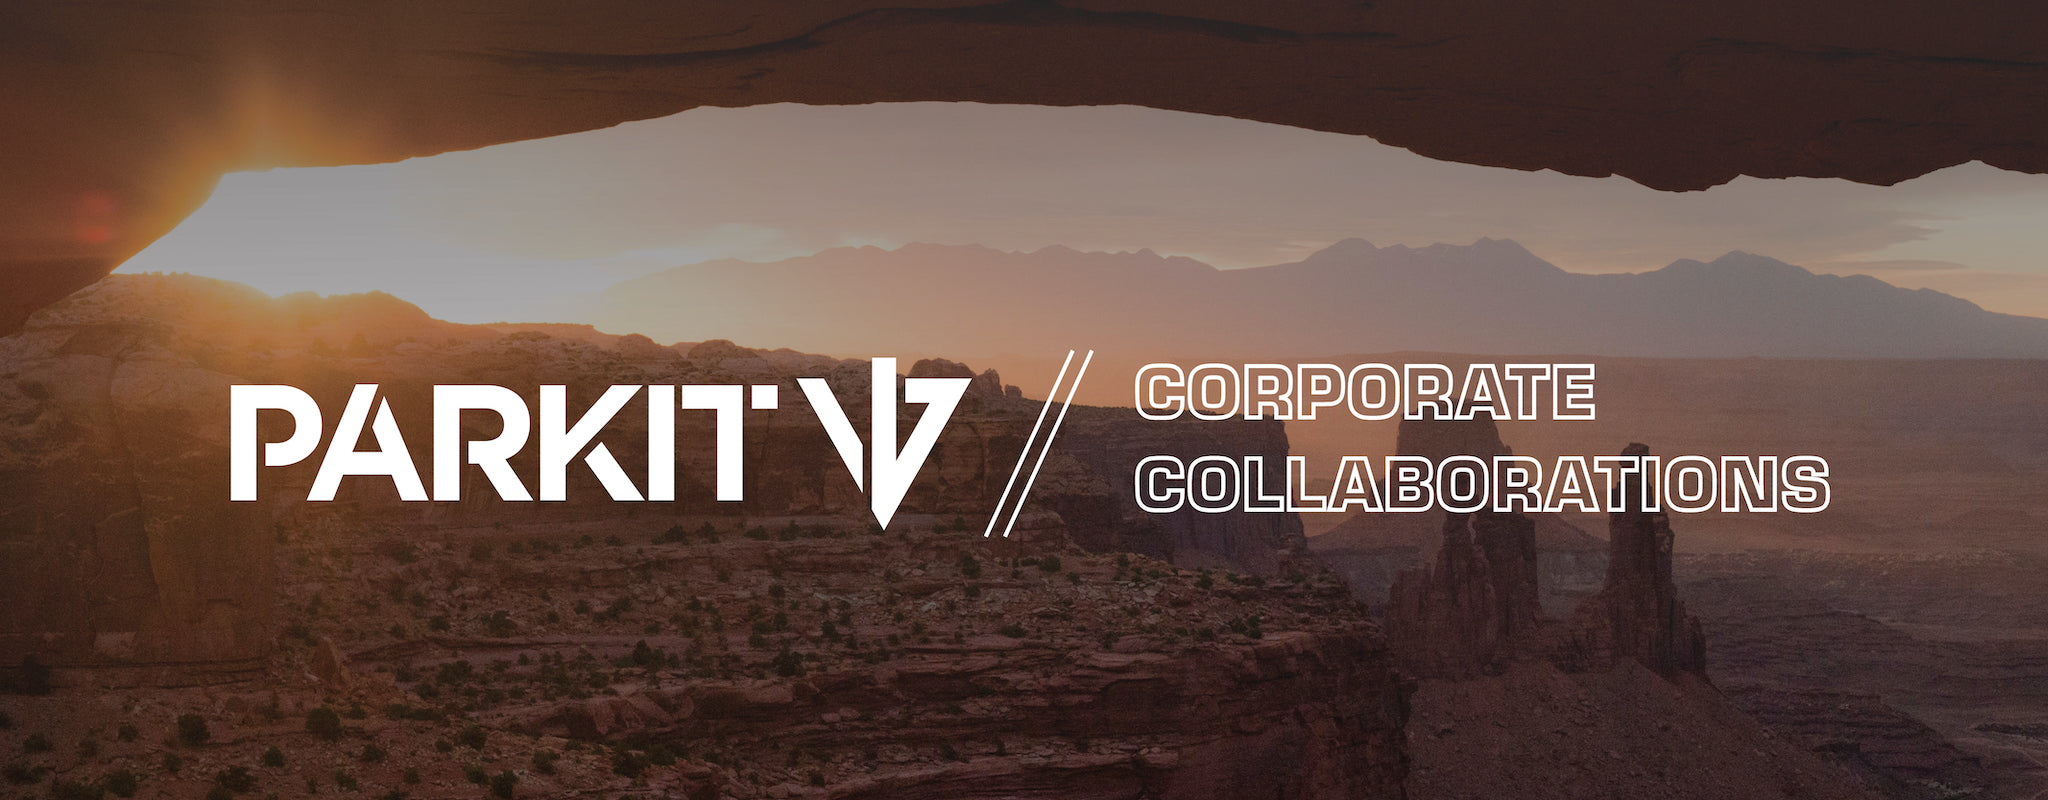 PARKIT CORPORATE COLLABORATIONS WITH A SUNSET AND BRYCE CANYON IN THE BACKGROUND